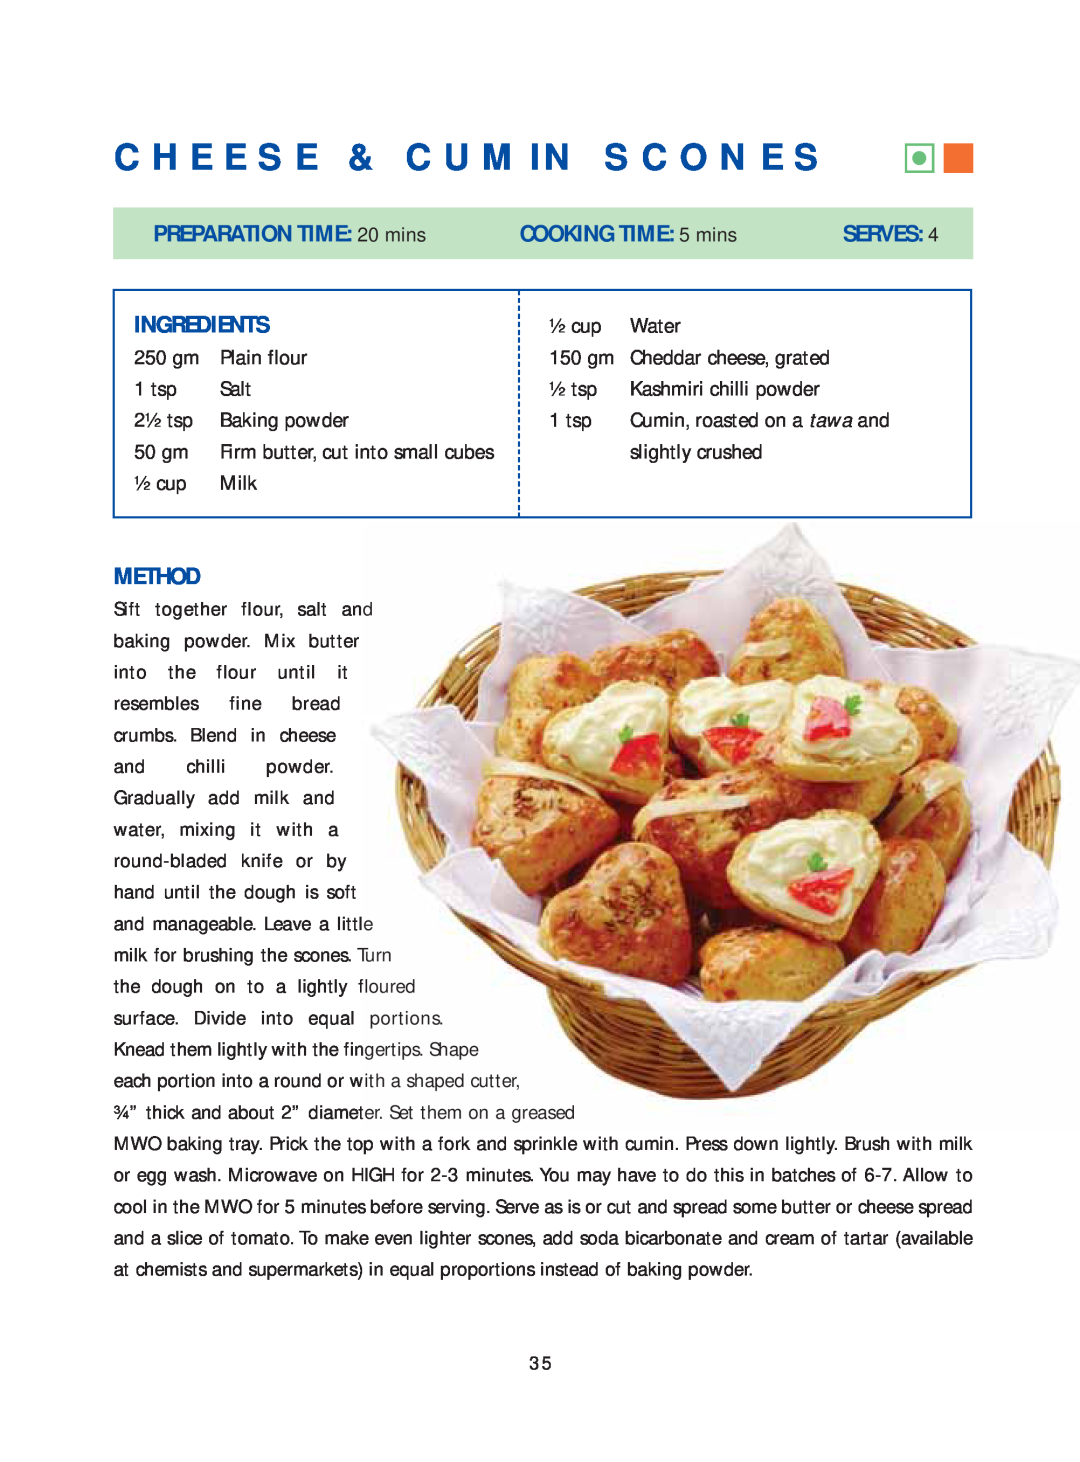 Samsung Microwave Oven Cheese & Cumin Scones, PREPARATION TIME: 20 mins, COOKING TIME: 5 mins, Serves, Ingredients, Method 